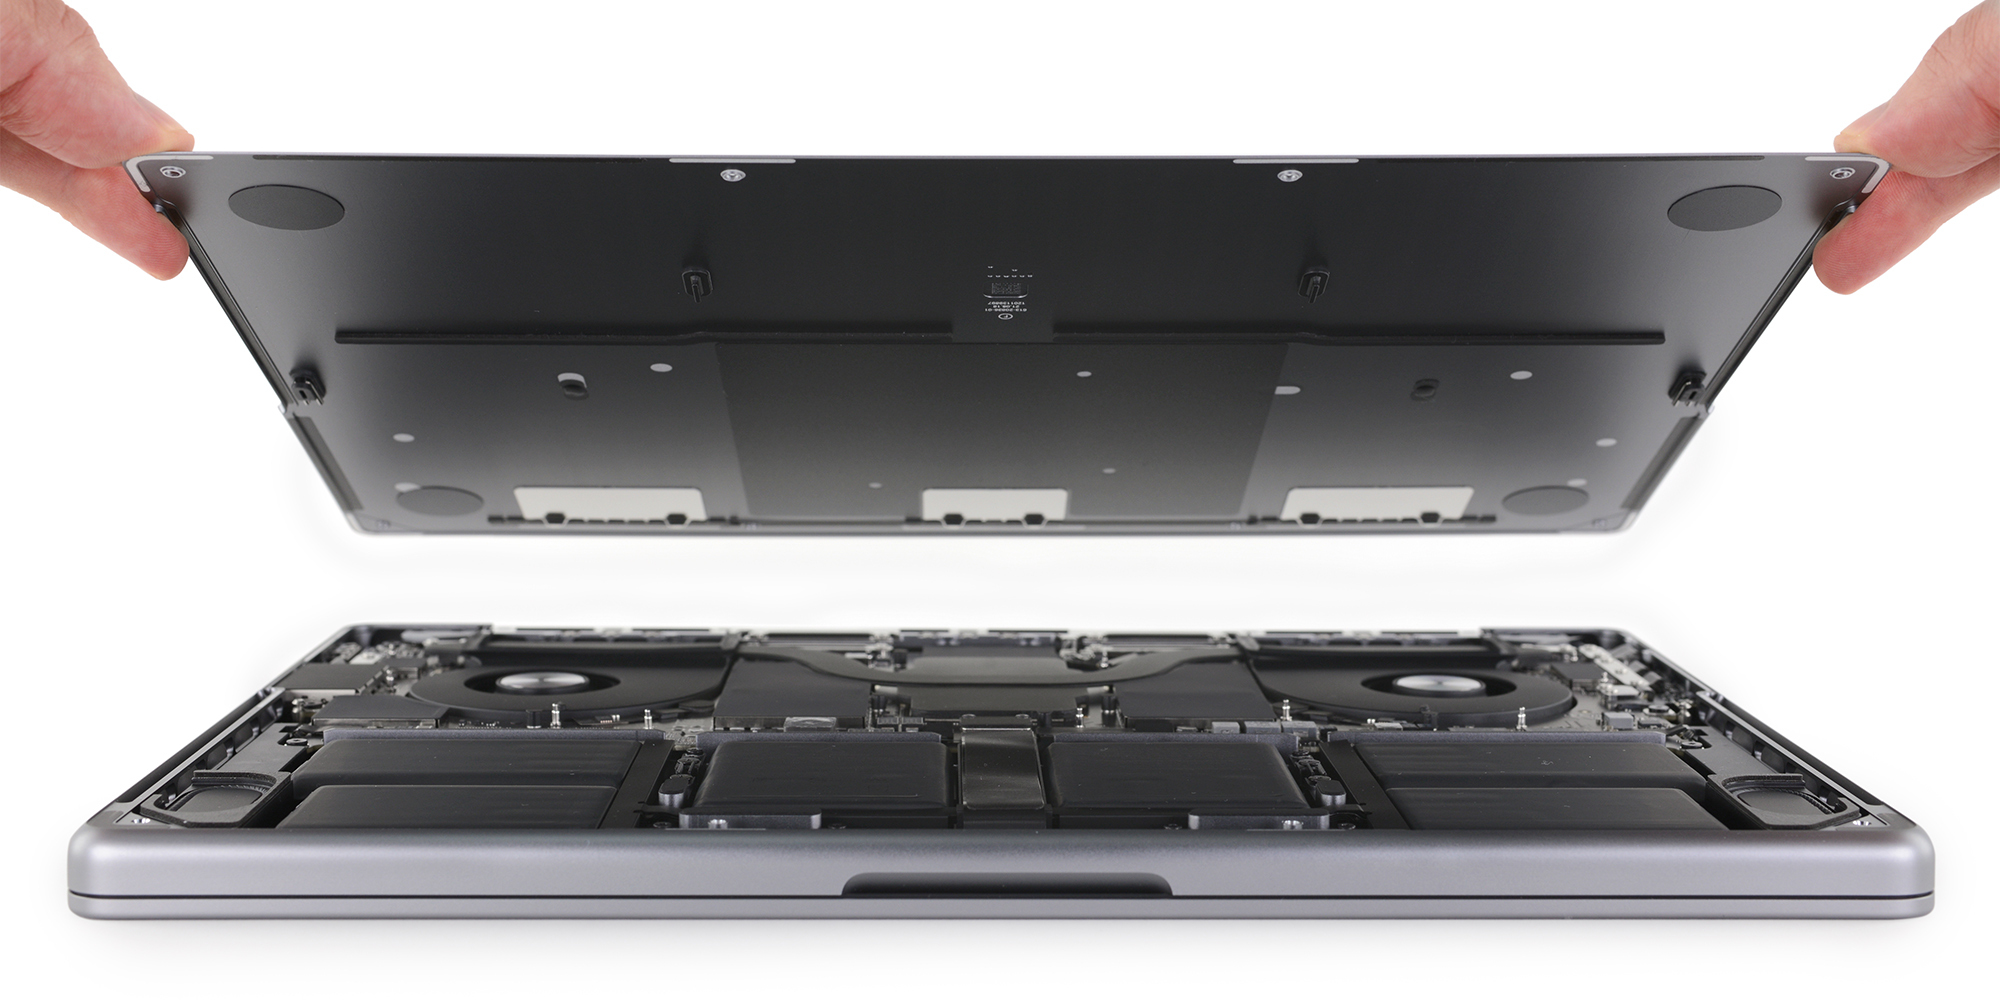 Ifixit New Macbook Pro Has First Diy